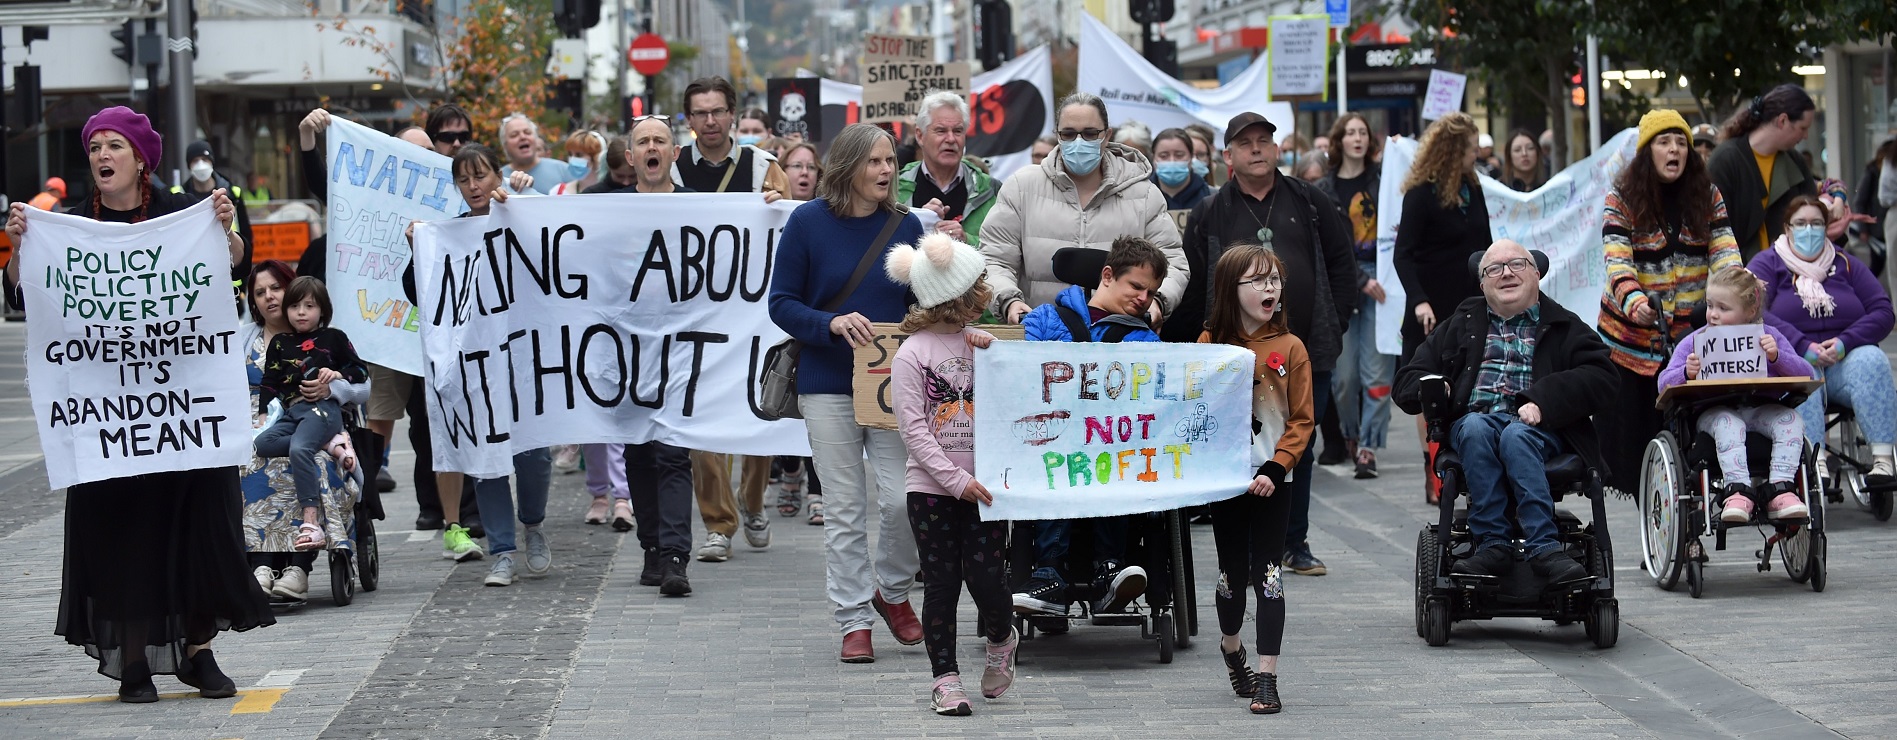 Dunedin city councillor Mandy Mayhem (left), at a protest this month about disability support...